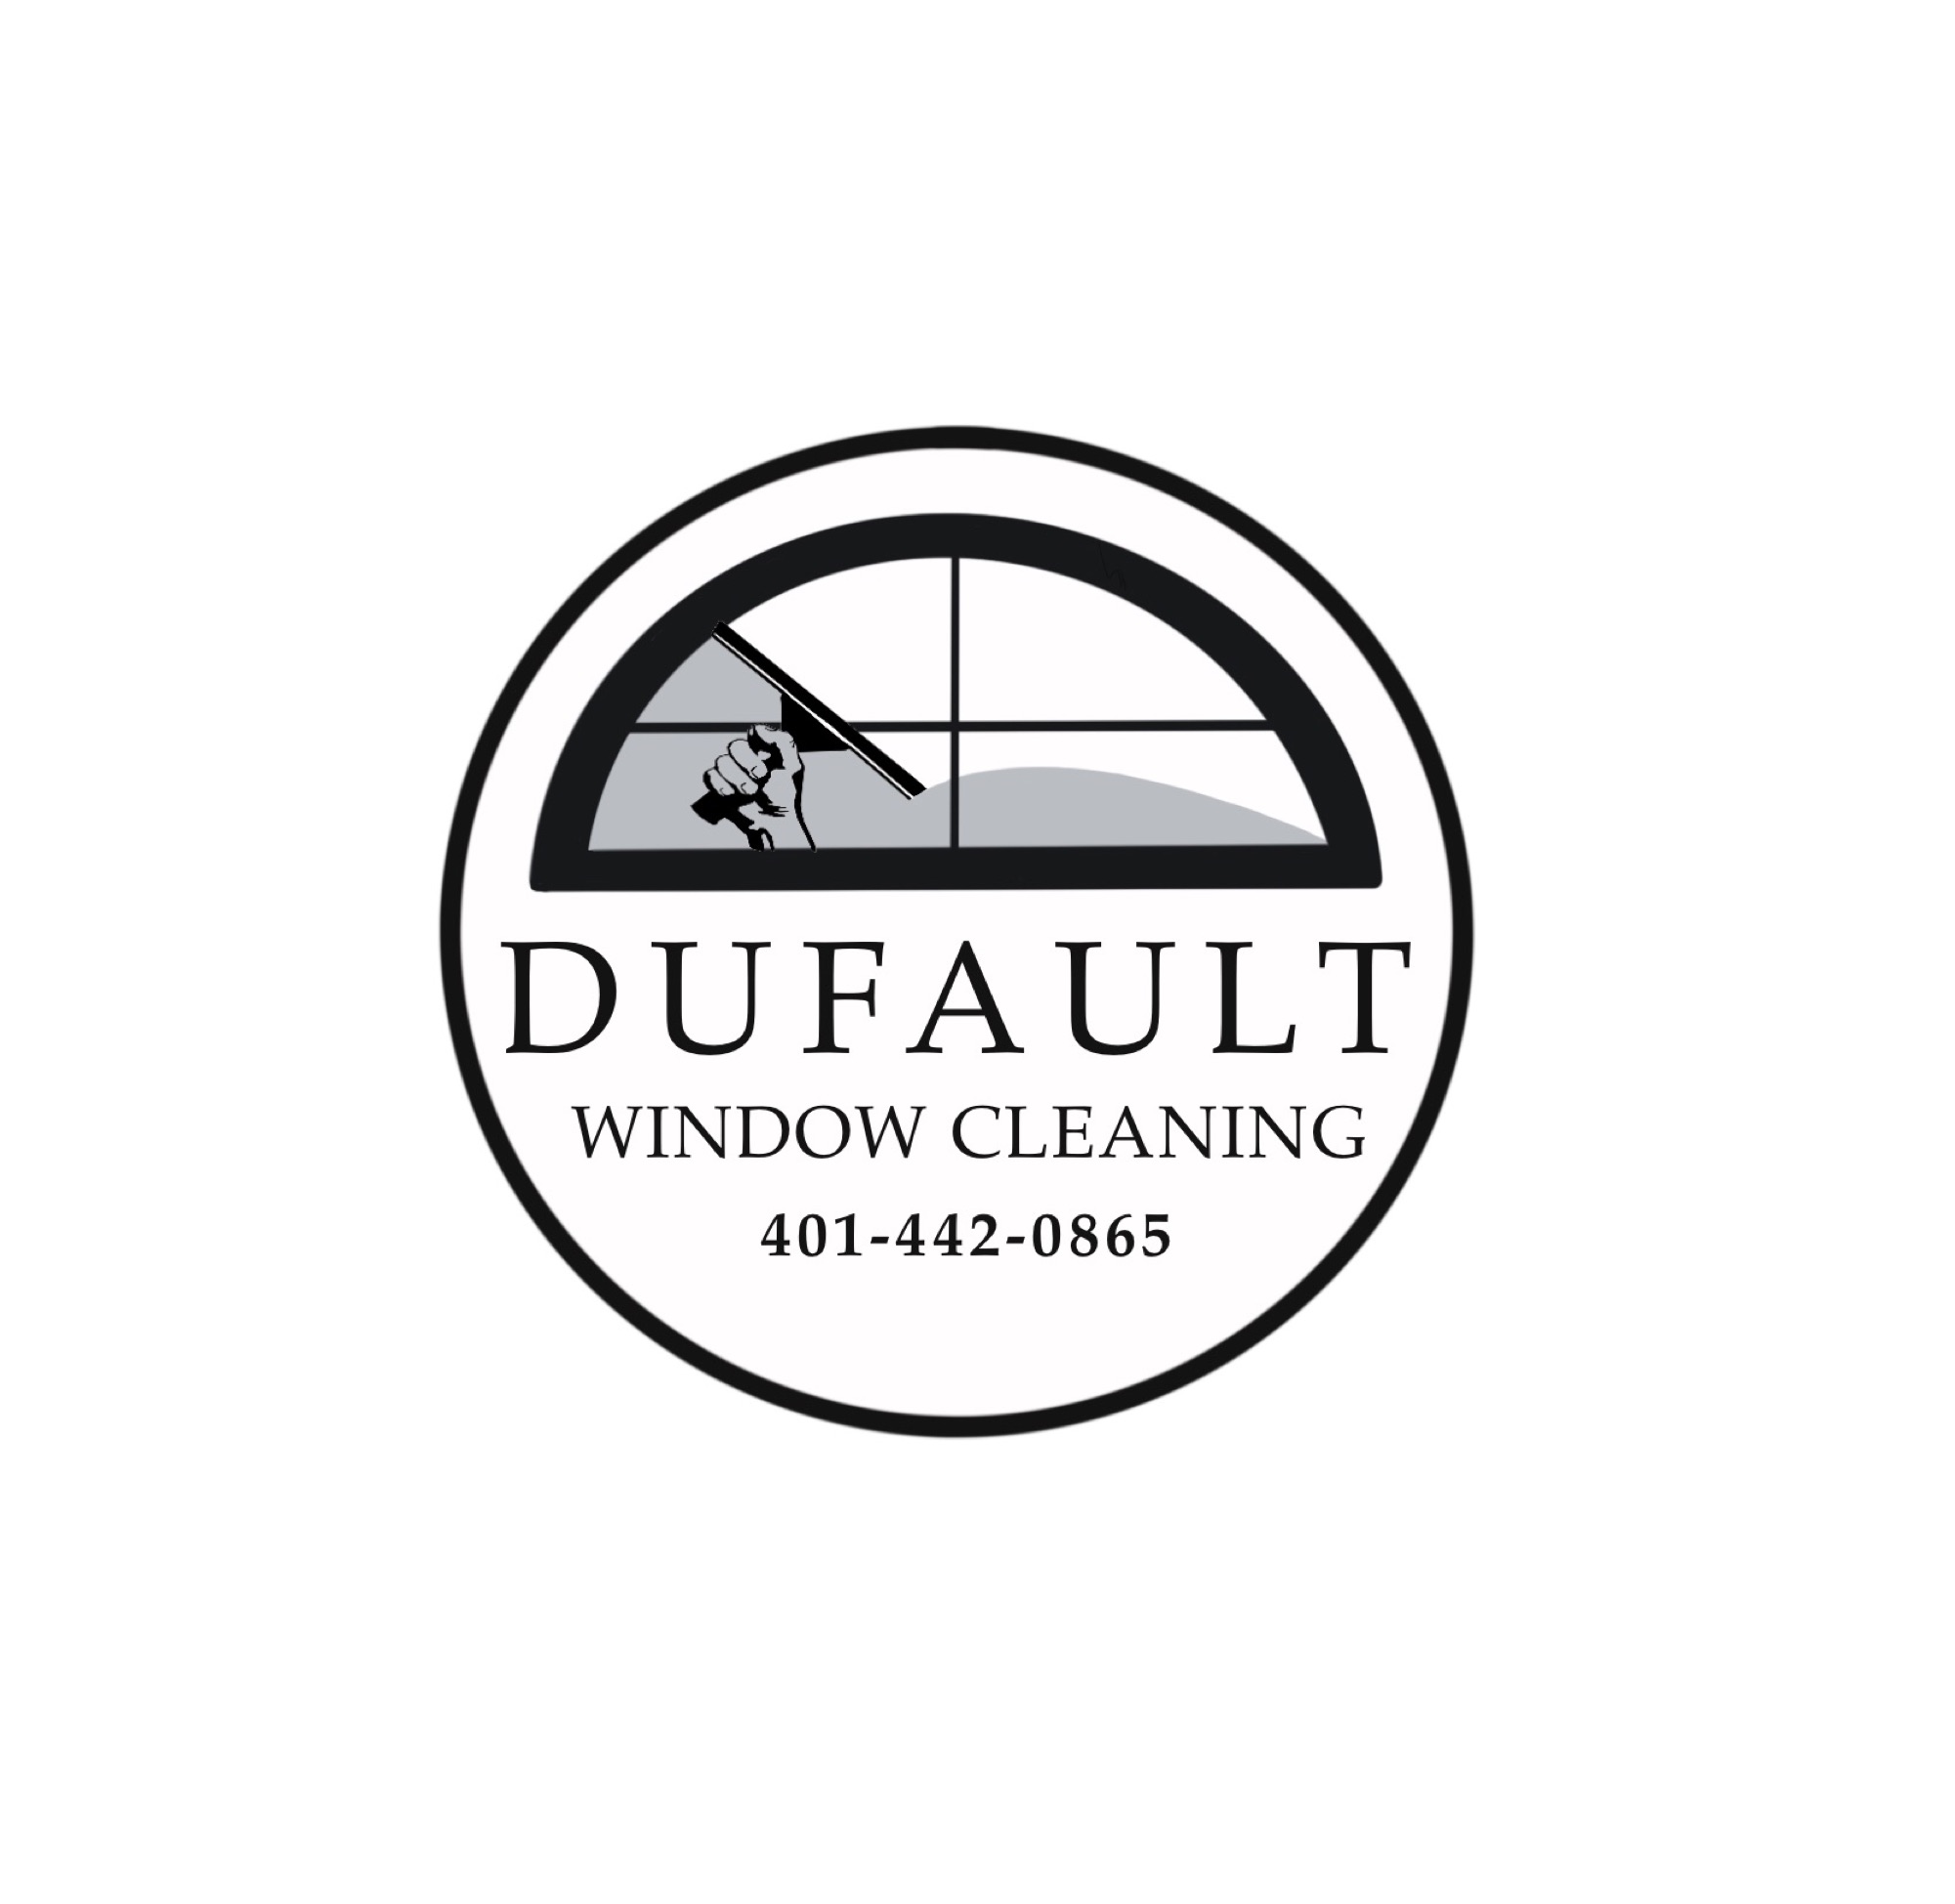 Dufault Window Cleaning Logo